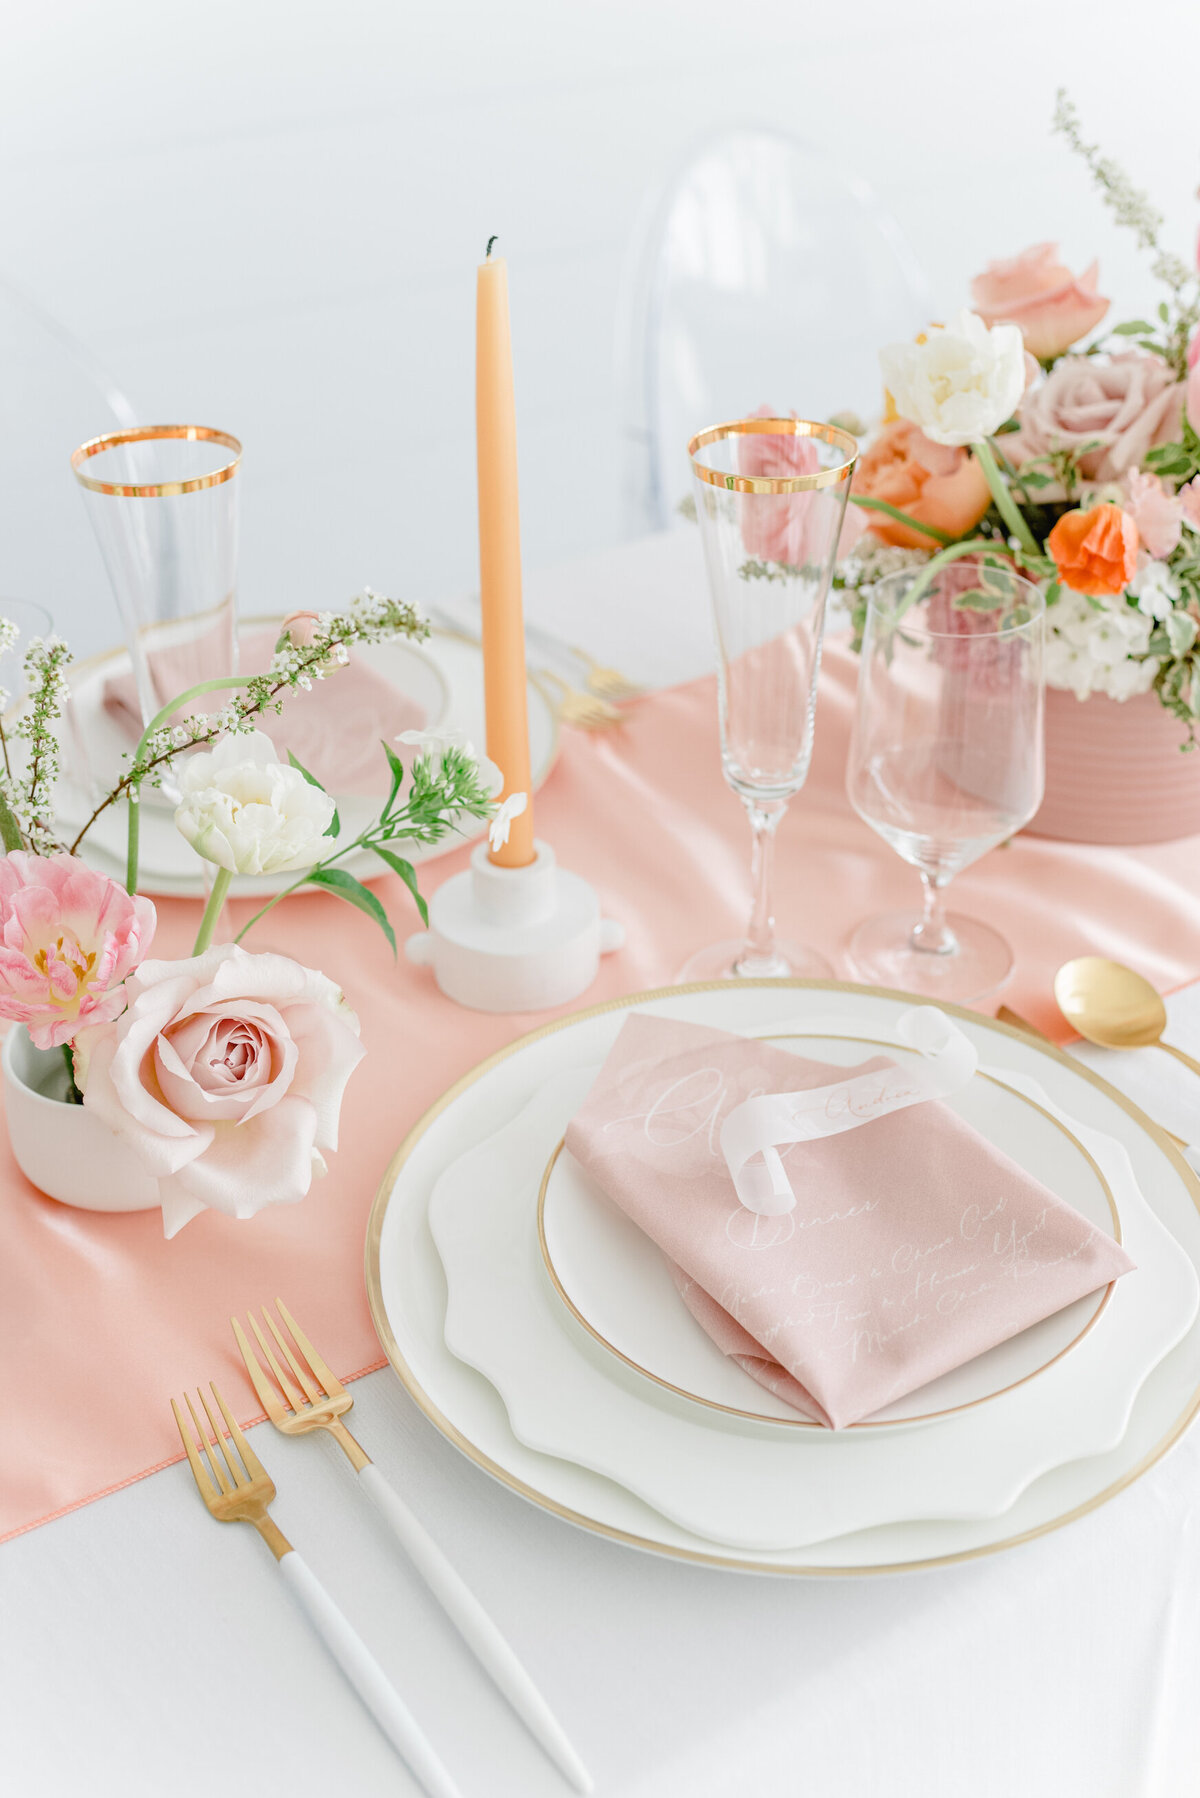 floral-and-field-design-bespoke-wedding-floral-styling-calgary-alberta-peach-kiss-editorial-tablescape-38